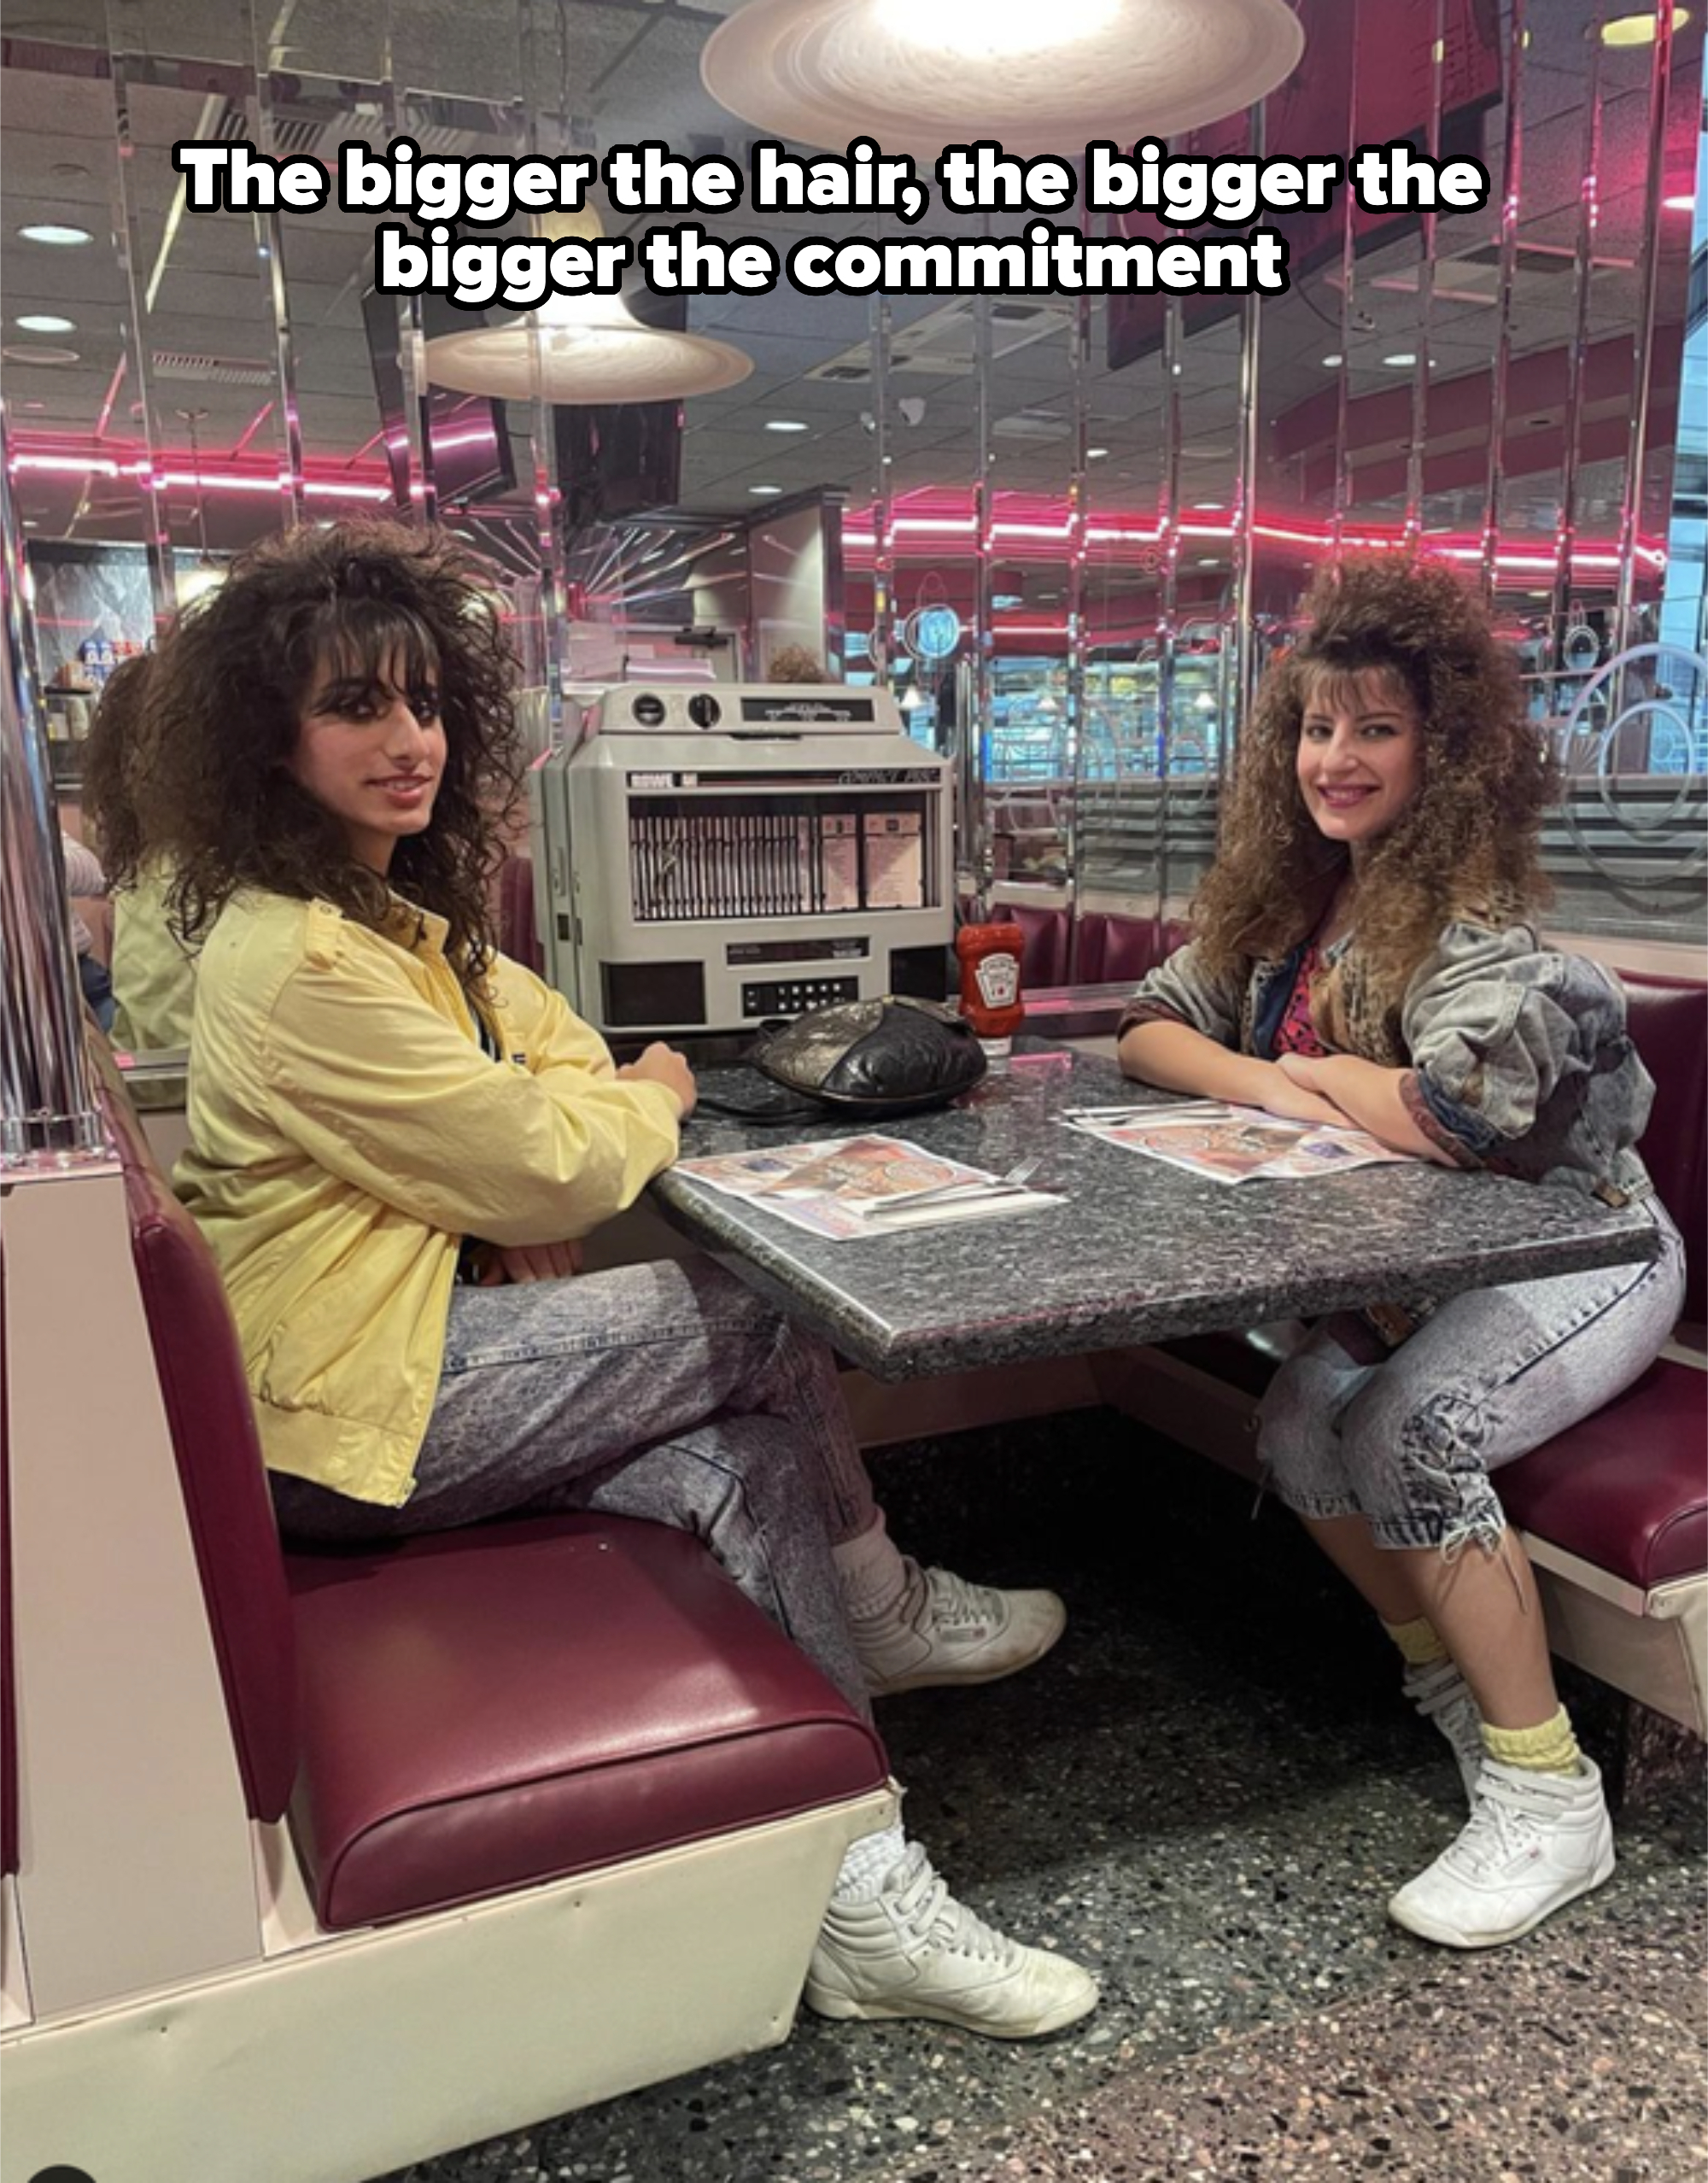 Two people sit at a retro diner booth with mirrors in the background, wearing vintage 1980s-style clothing including jackets and sneakers